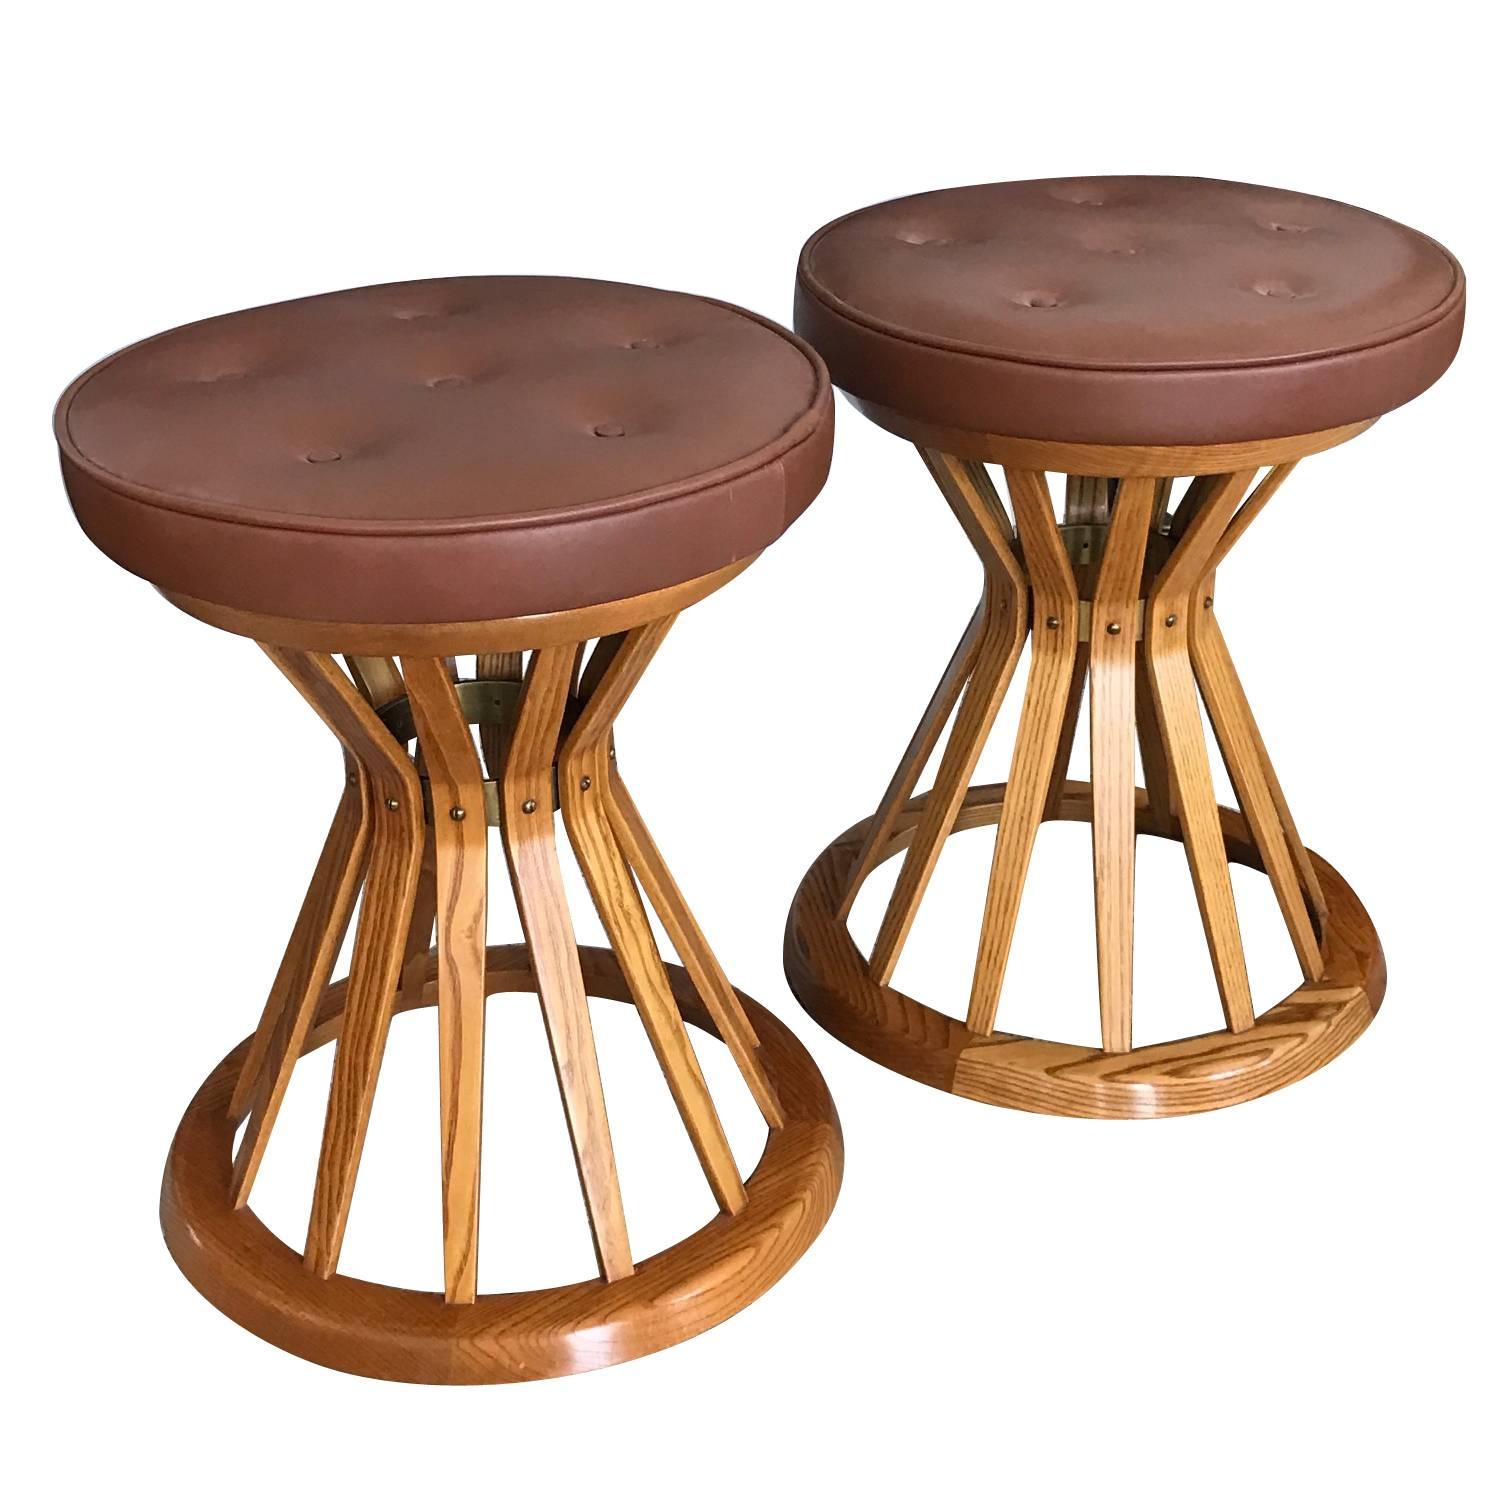 Pair of "Sheaf of Wheat" Ottomans by E.Wormley for Dunbar